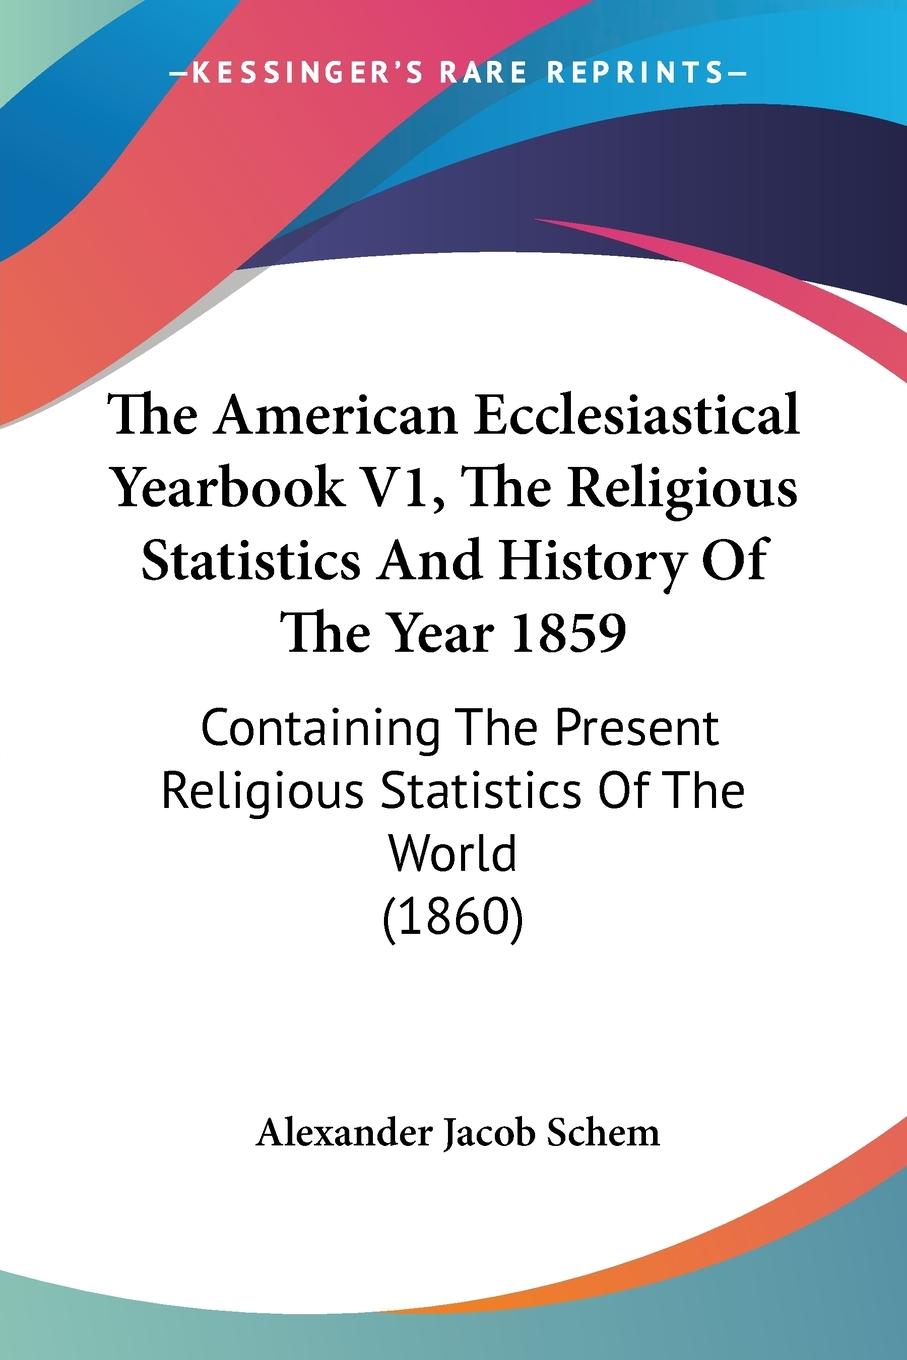 The American Ecclesiastical Yearbook V1, The Religious Statistics And History Of The Year 1859 - Schem, Alexander Jacob